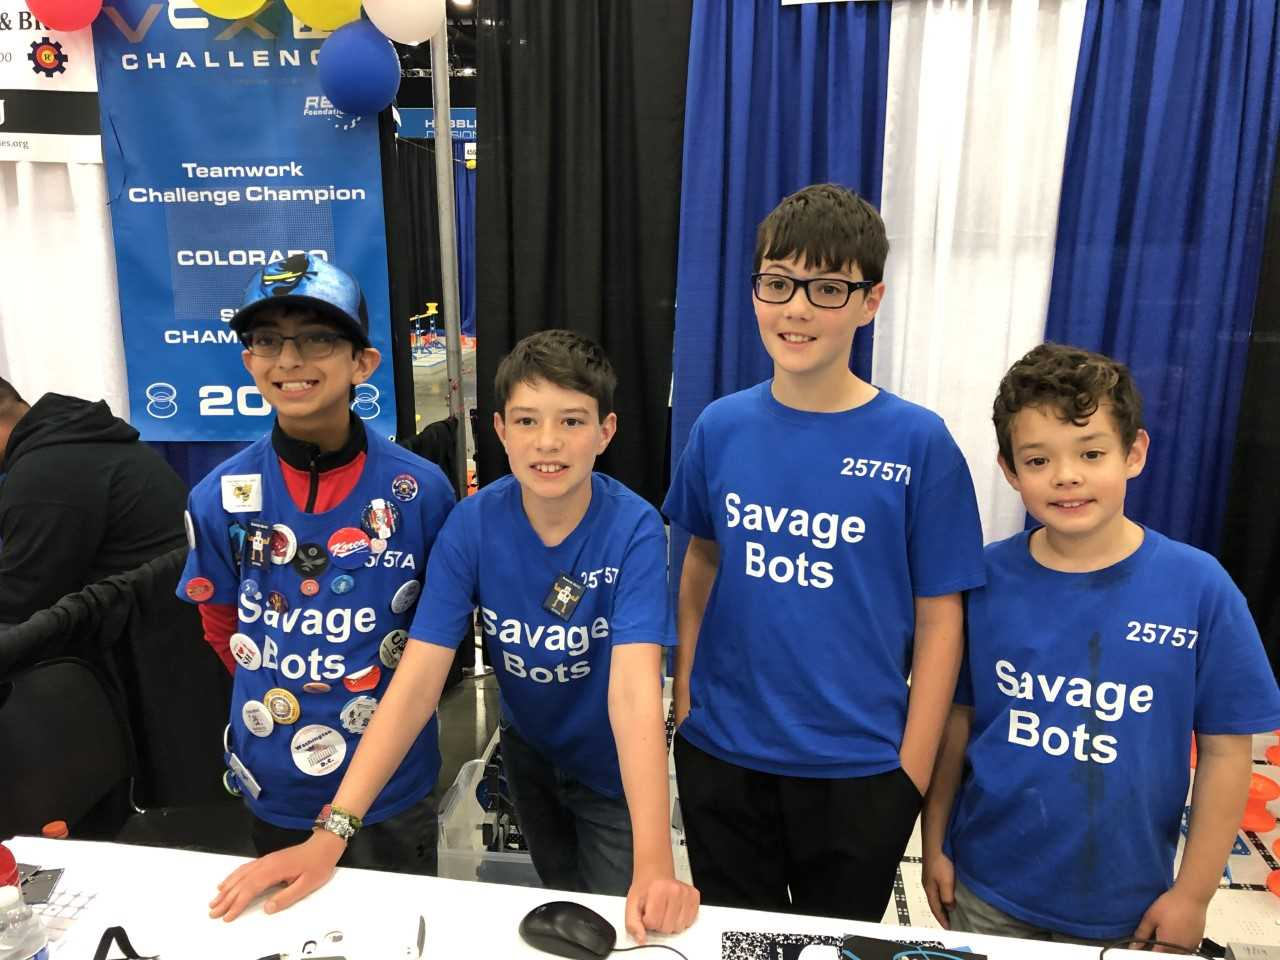 MAY 2019: NYSMITH TEAM COMPETED IN THE 2019 elementary School Level Vex IQ World Championship in Louisville, Kentucky